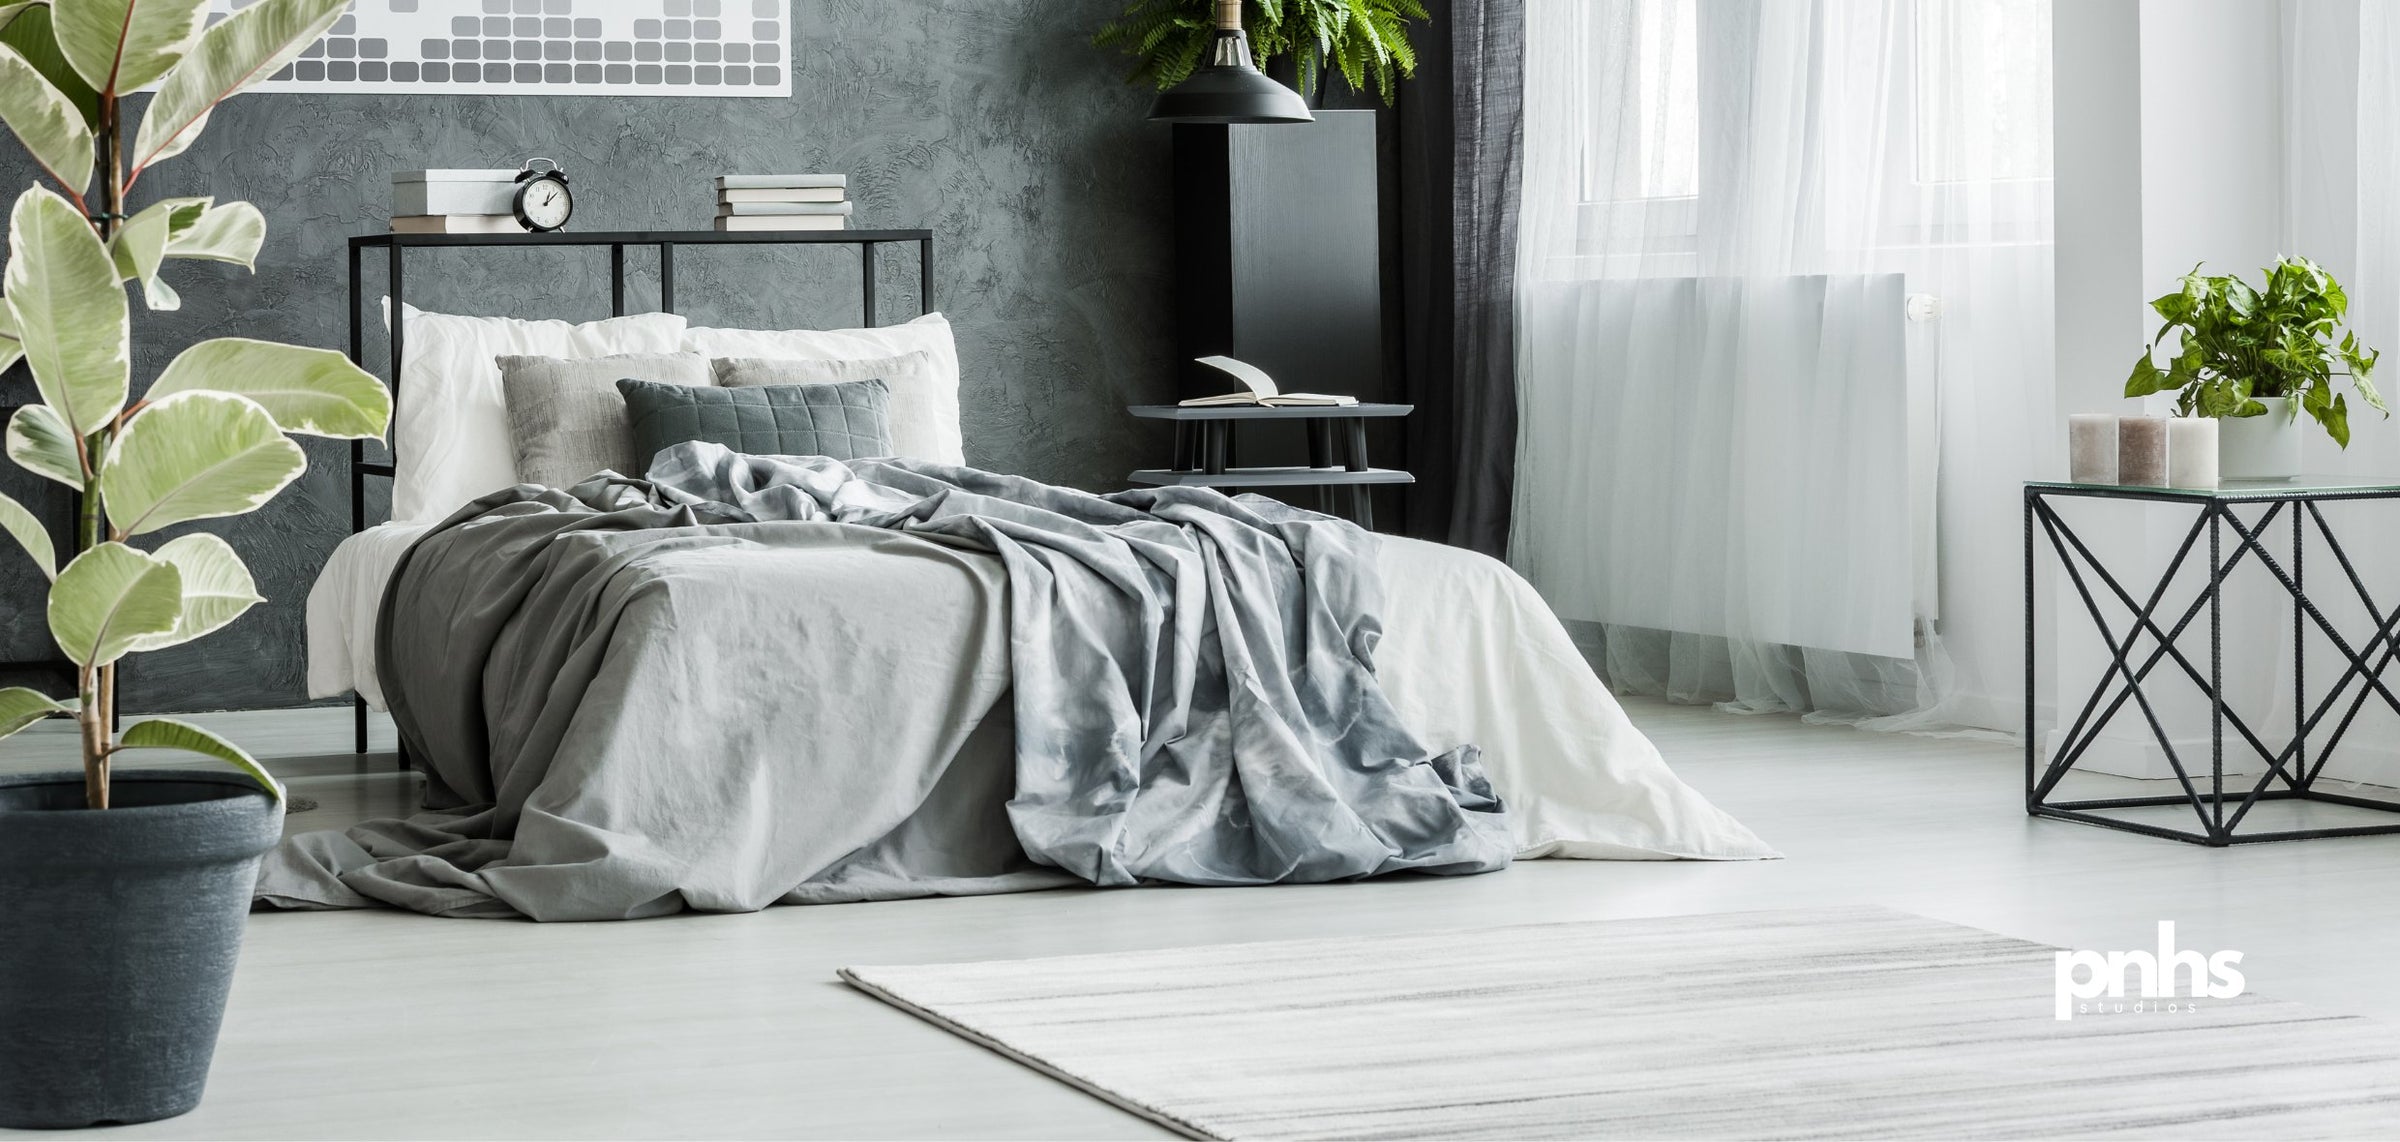 High-Quality Designer Textiles for Modern Bedrooms: Luxury and Comfort.